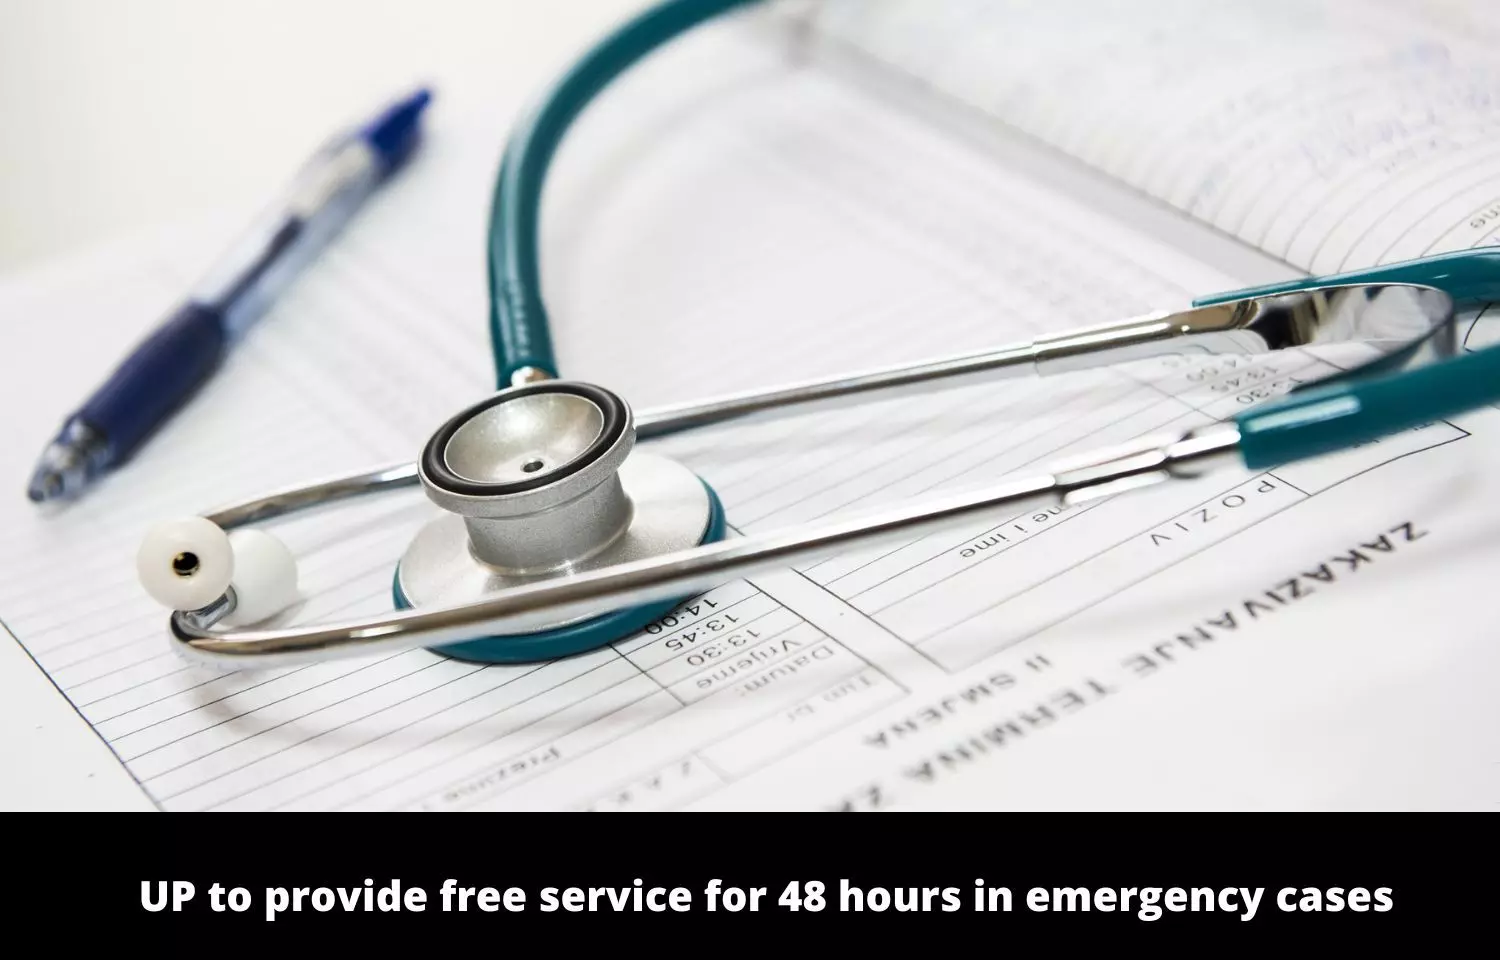 UP to provide free treatment for 48 hours to every emergency care patient